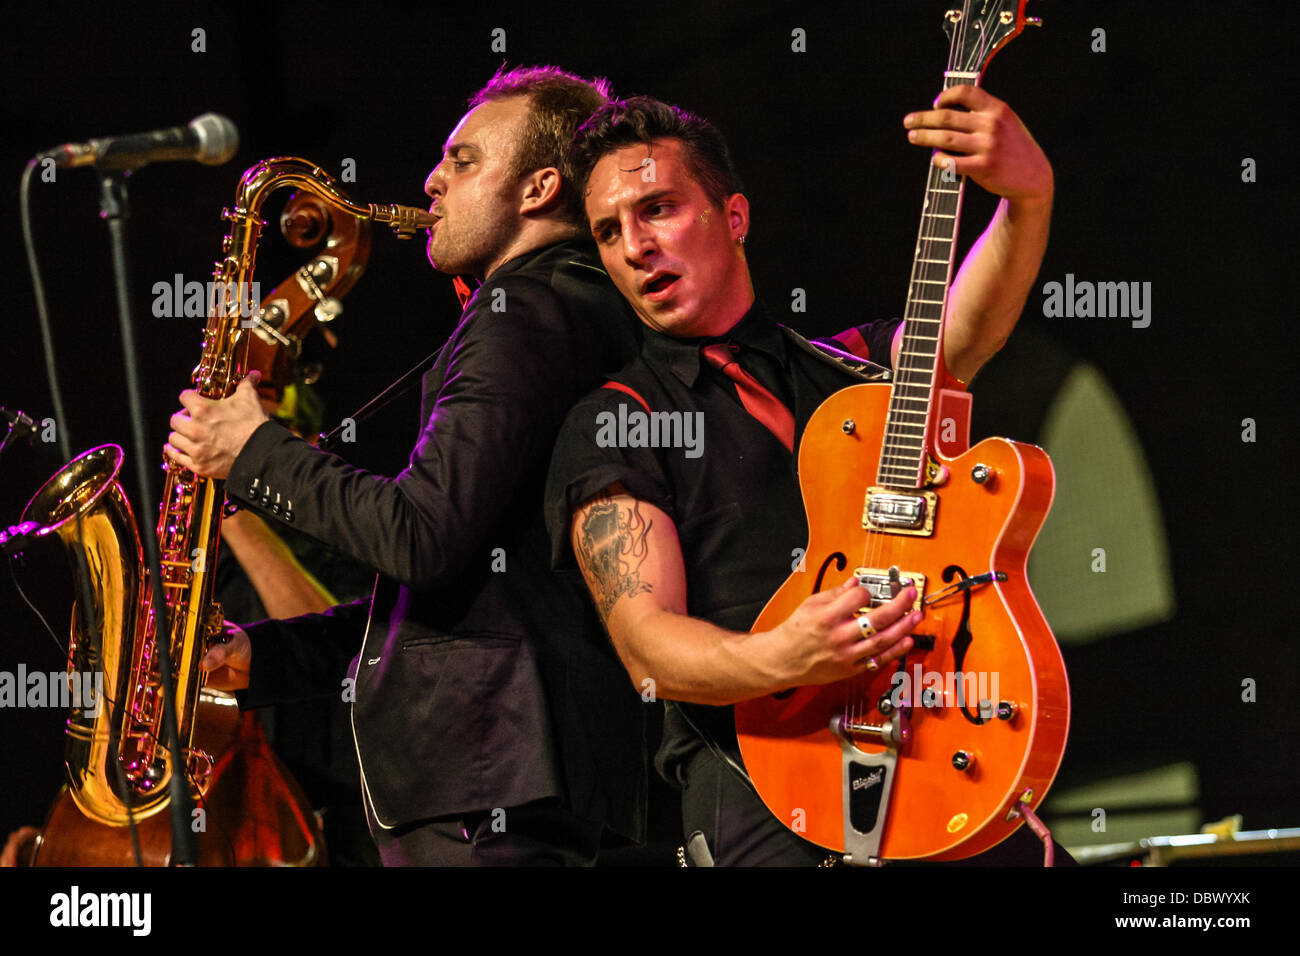 Senigallia, Italy. 2nd August, 2013. Waiting the Summer Jamboree  [International Festival 60's revival Rock & Roll], Slike Steve and the Gangsters, at Main stage in Foro Annonario, Italy on Aug 04, 2013. Credit:  Valerio Agolino/Alamy Live News Stock Photo